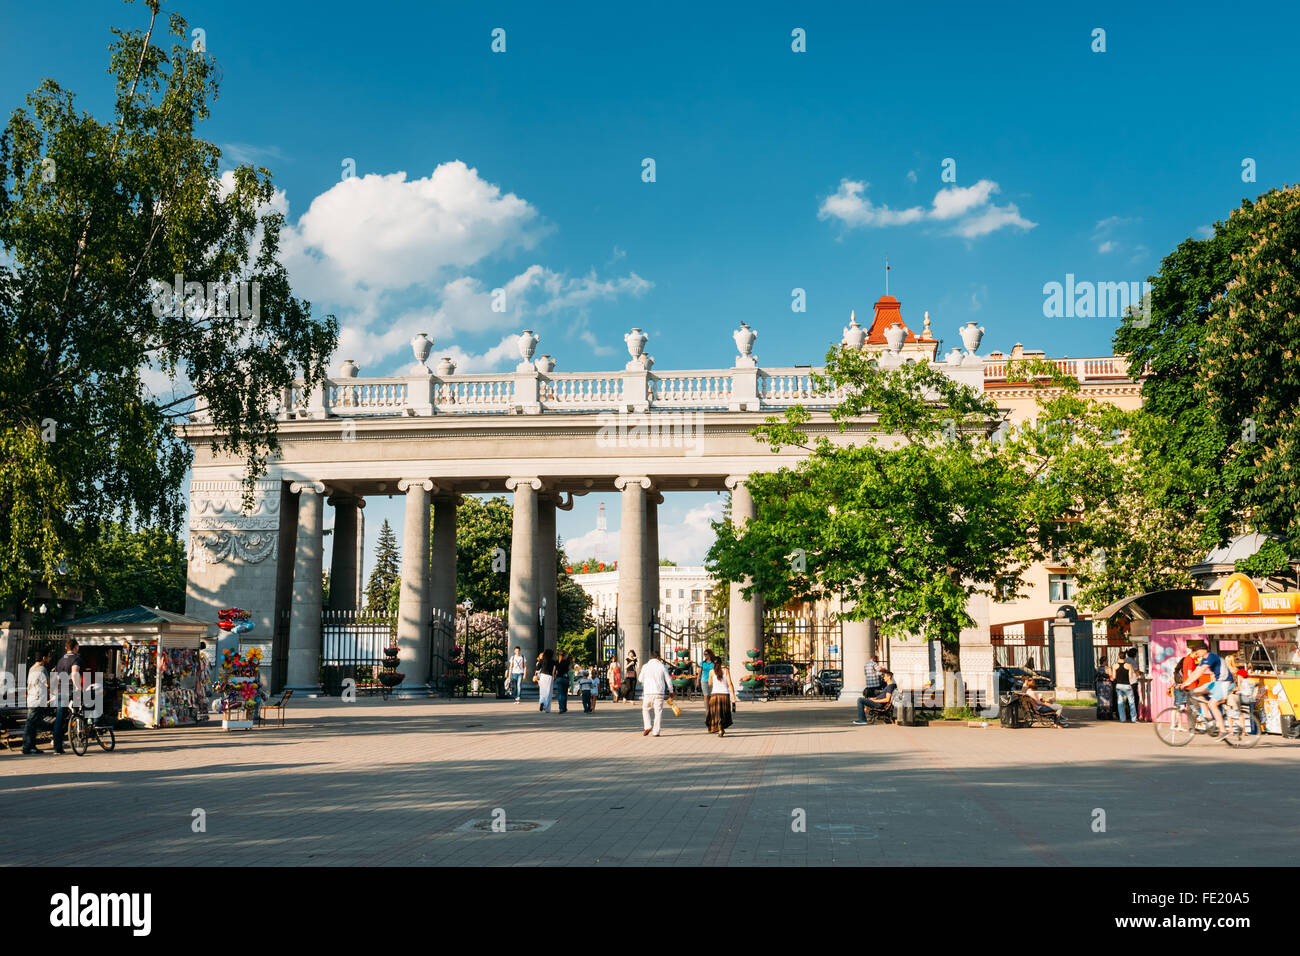 Main pillared entrance into Gorky Park in Minsk, Belarus. People walking to Gorky park at summer evening Stock Photo